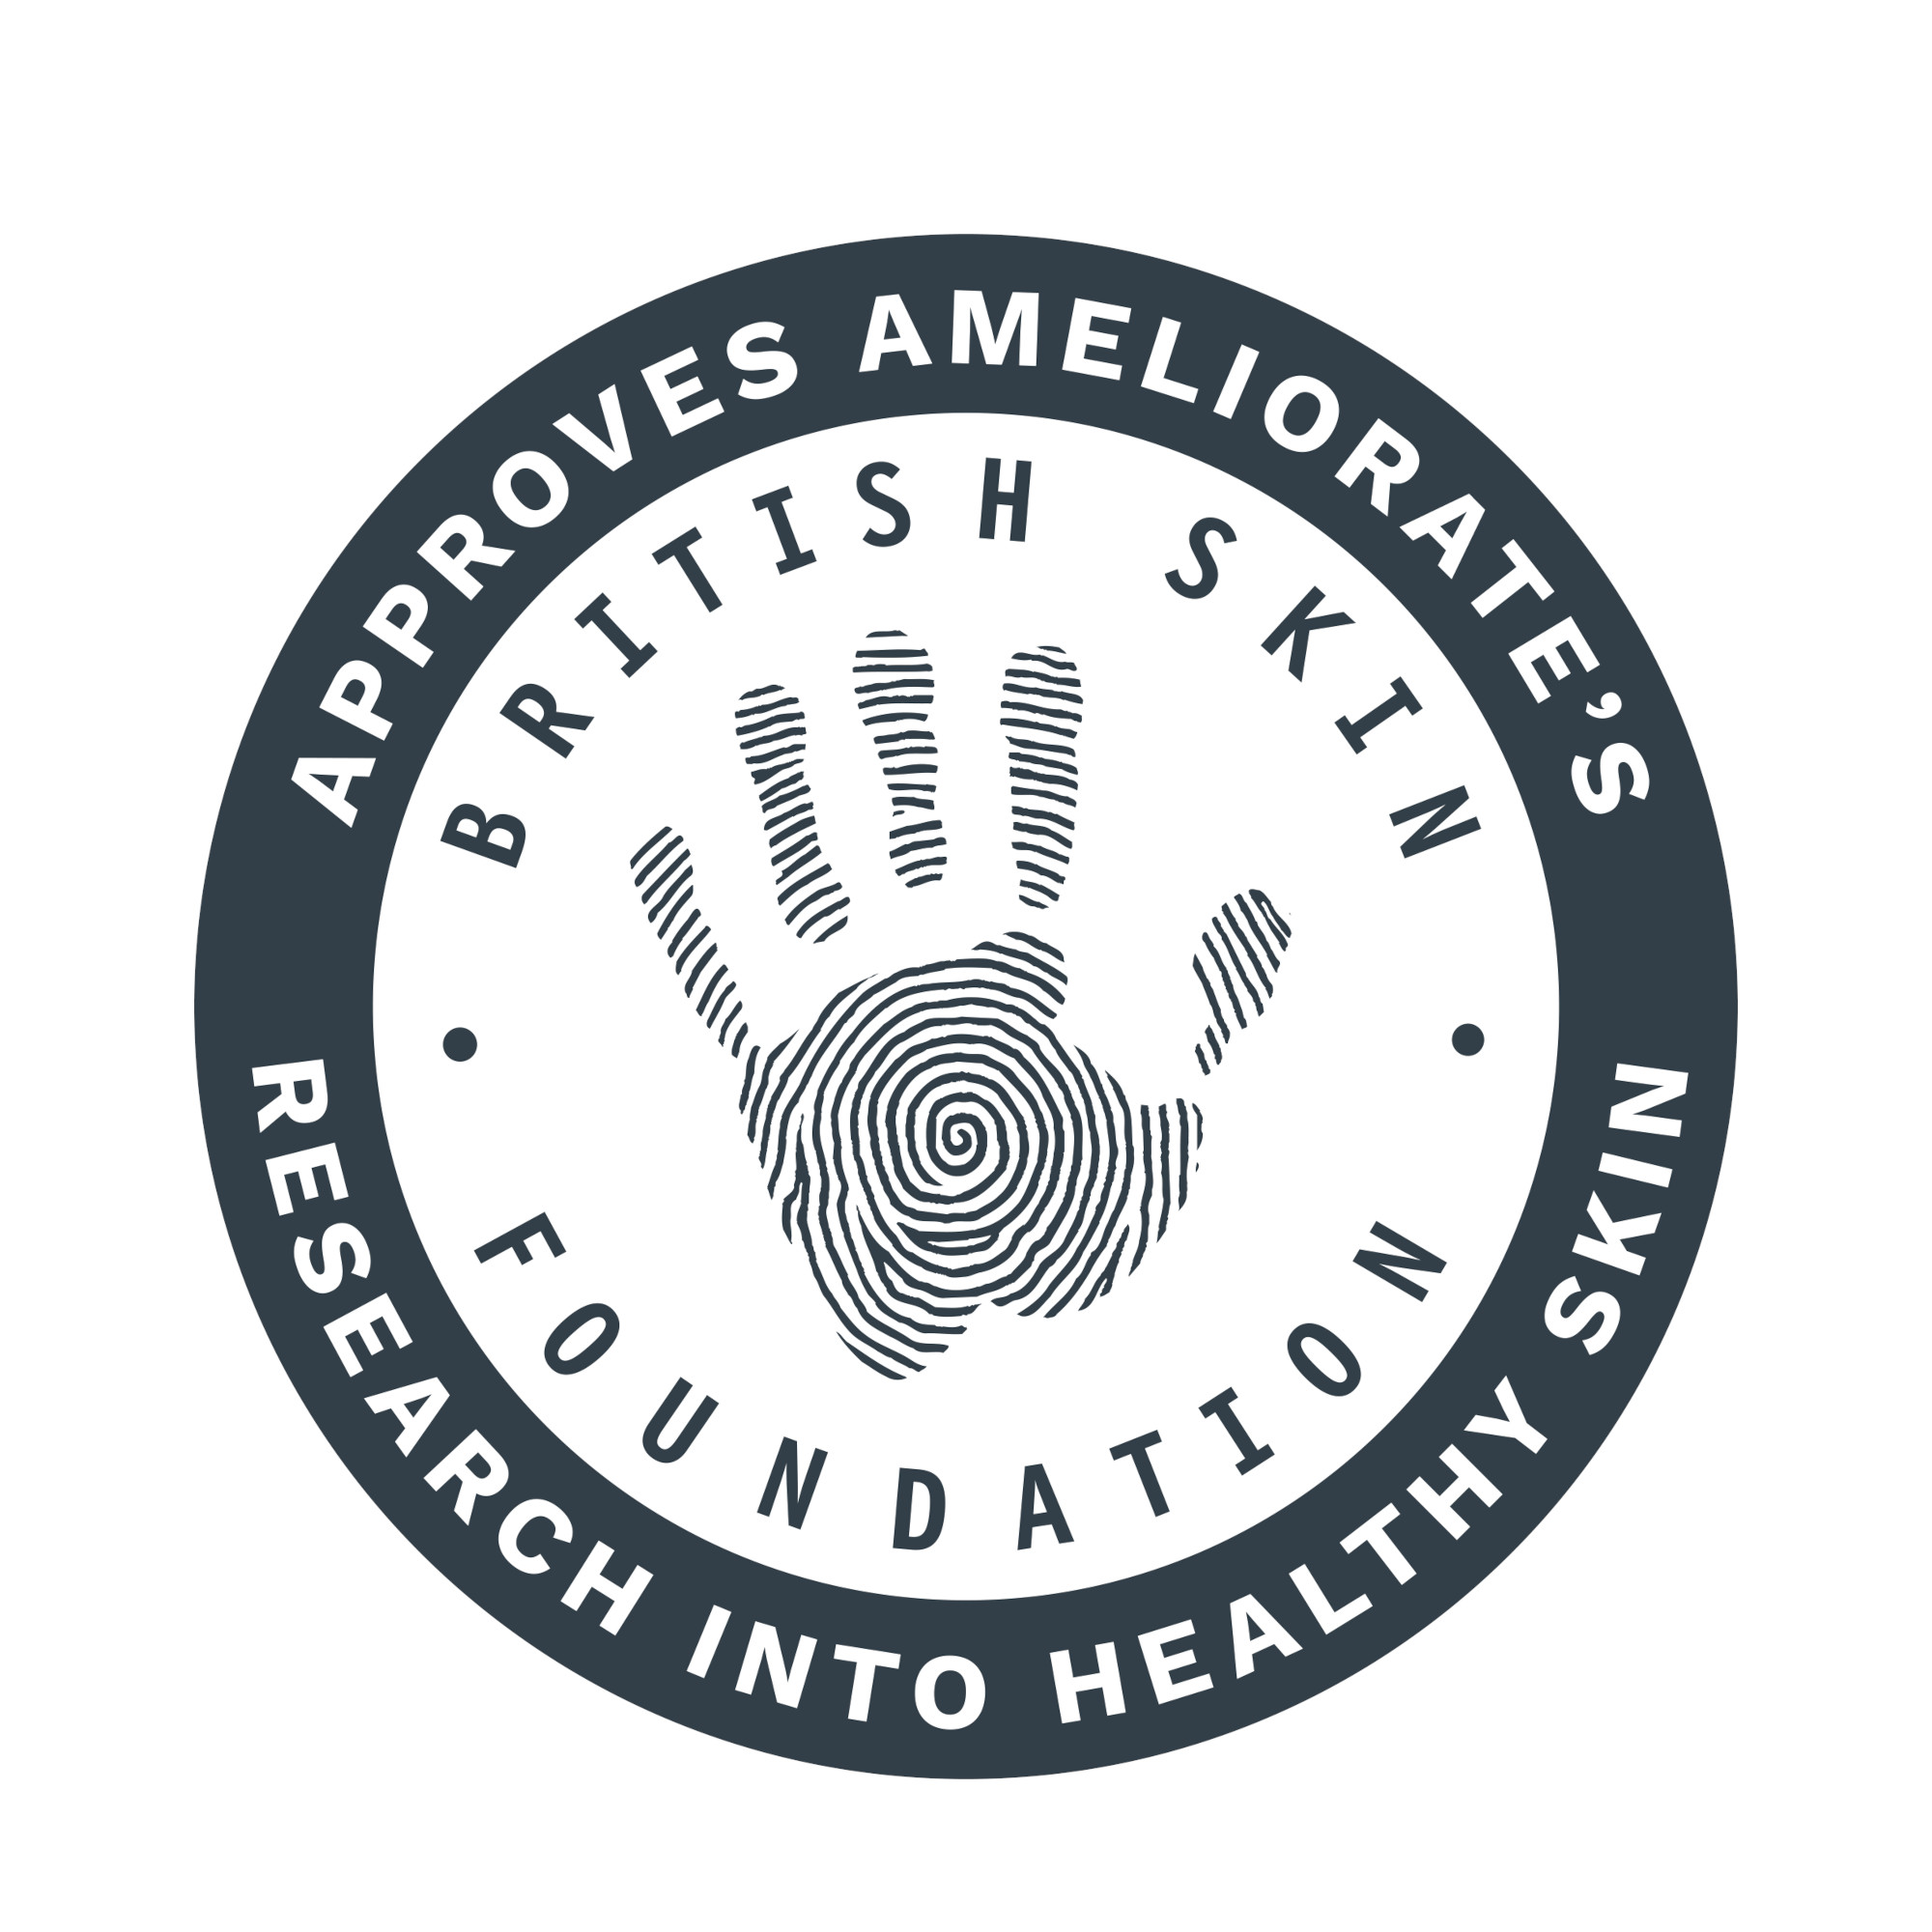 Approves Ameliorate's research into health skin: British skin foundation